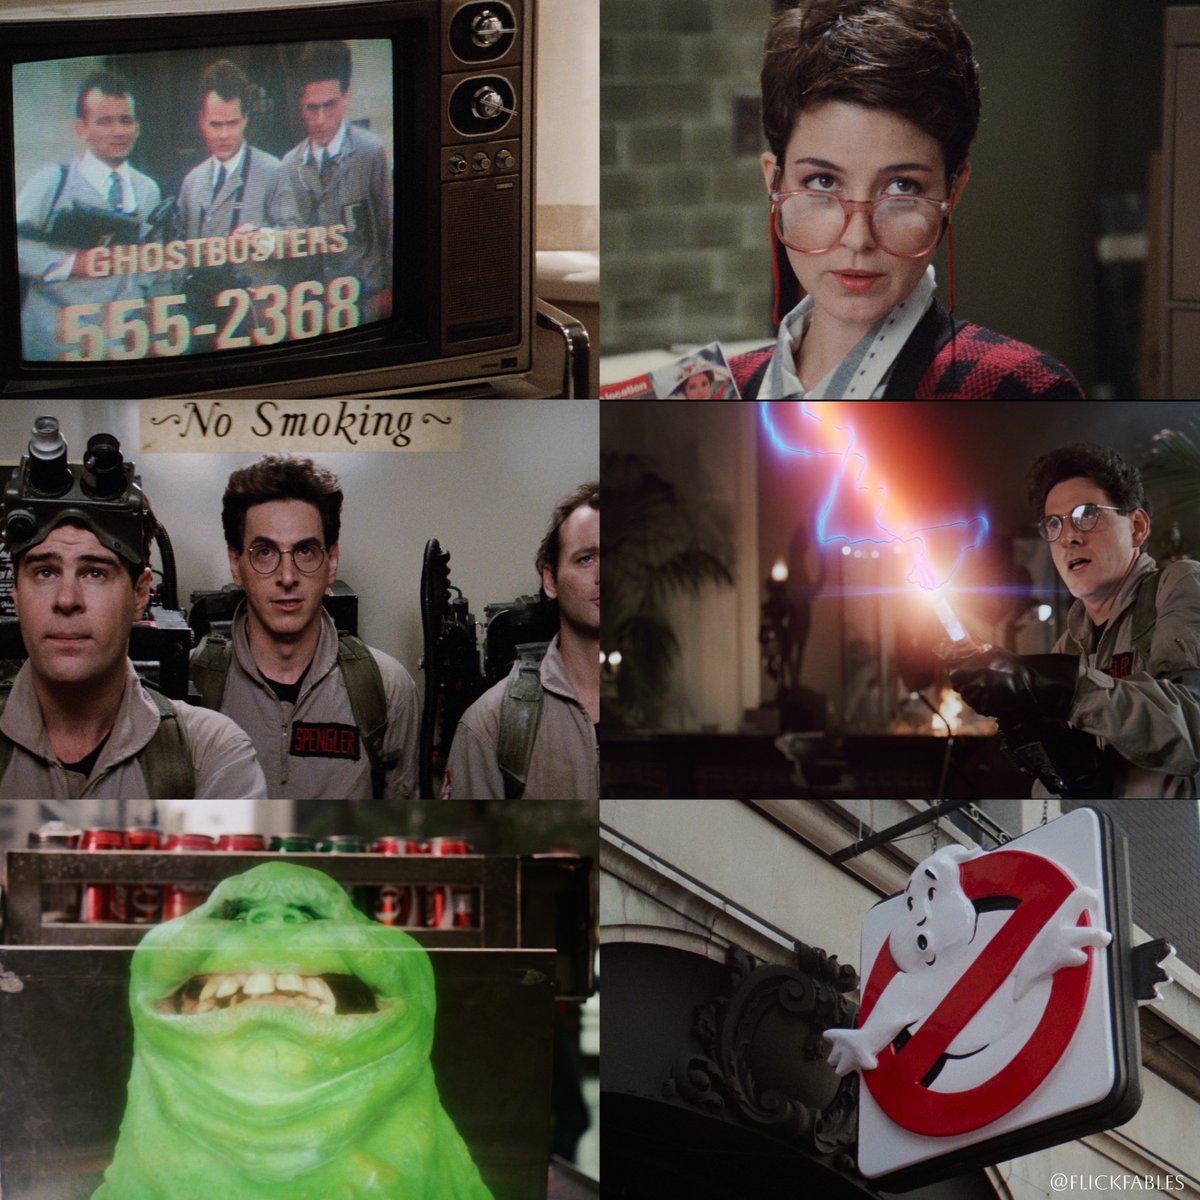 Ghostbusters (1984) 
Directed by Ivan Reitman

This iconic comedy-horror film, filled with memorable characters and ghostly encounters, remains a supernatural classic.

#Ghostbusters #ComedyHorror #IvanReitman #BillMurray  #DanAykroyd #SigourneyWeaver